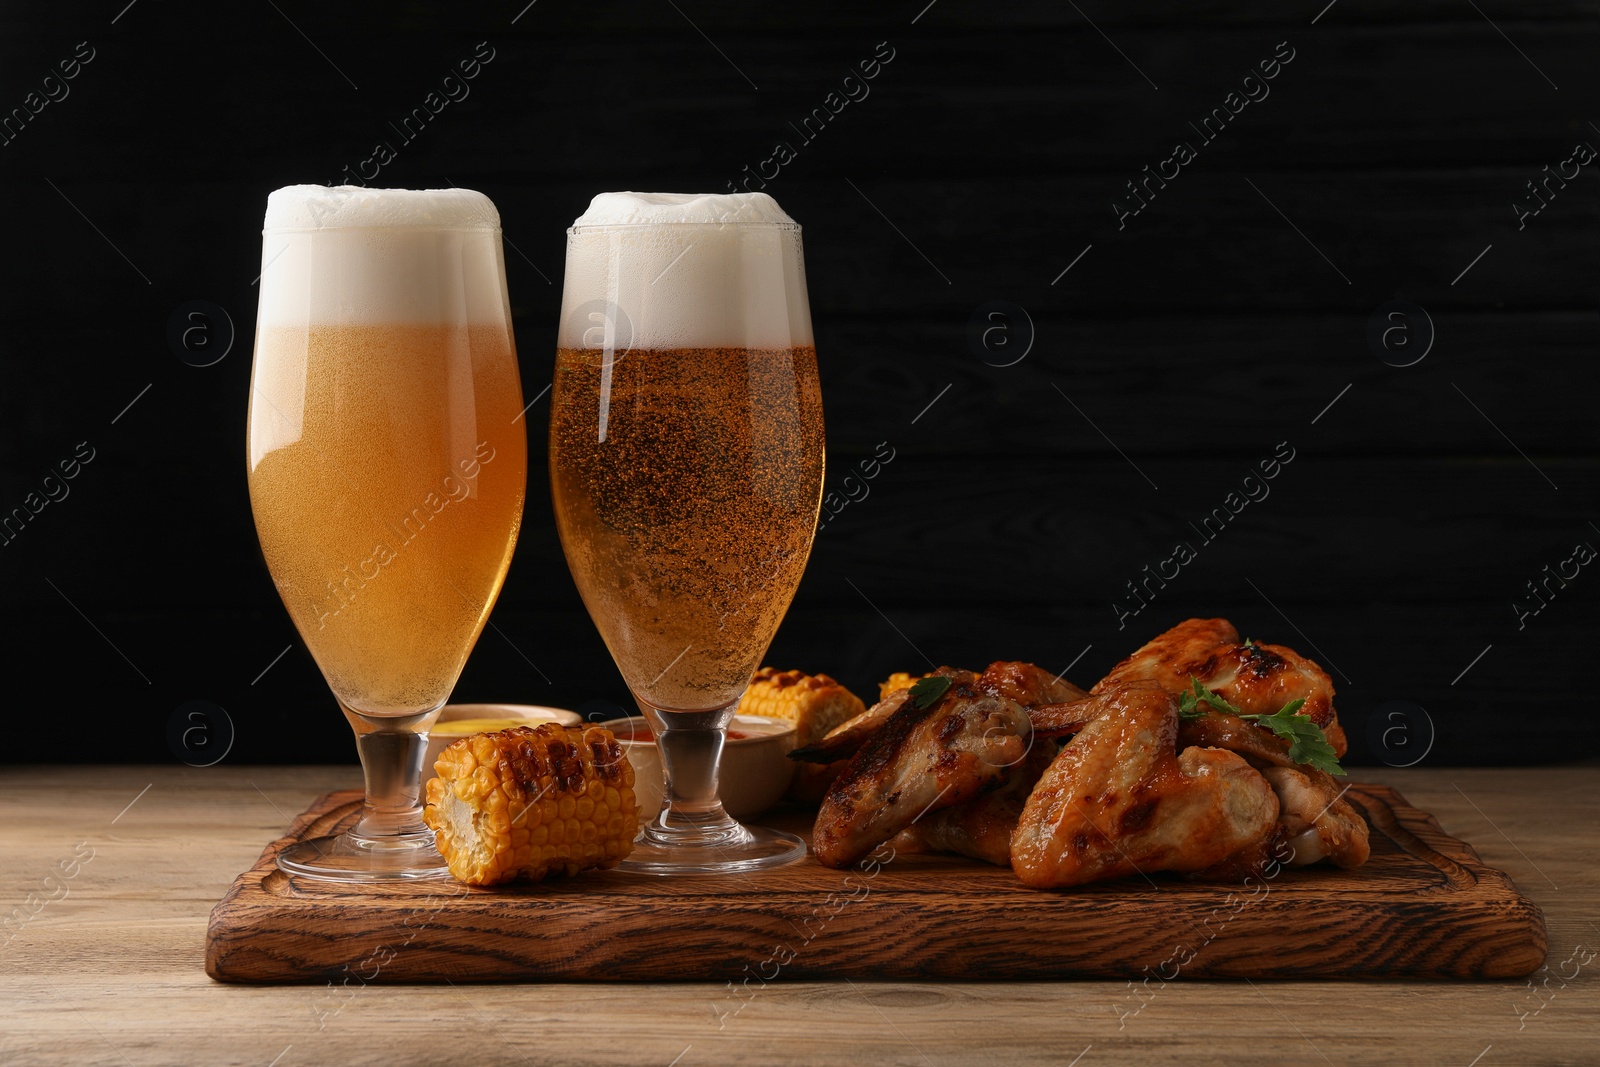 Photo of Delicious baked chicken wings, grilled corn and glasses with beer on wooden table against black background